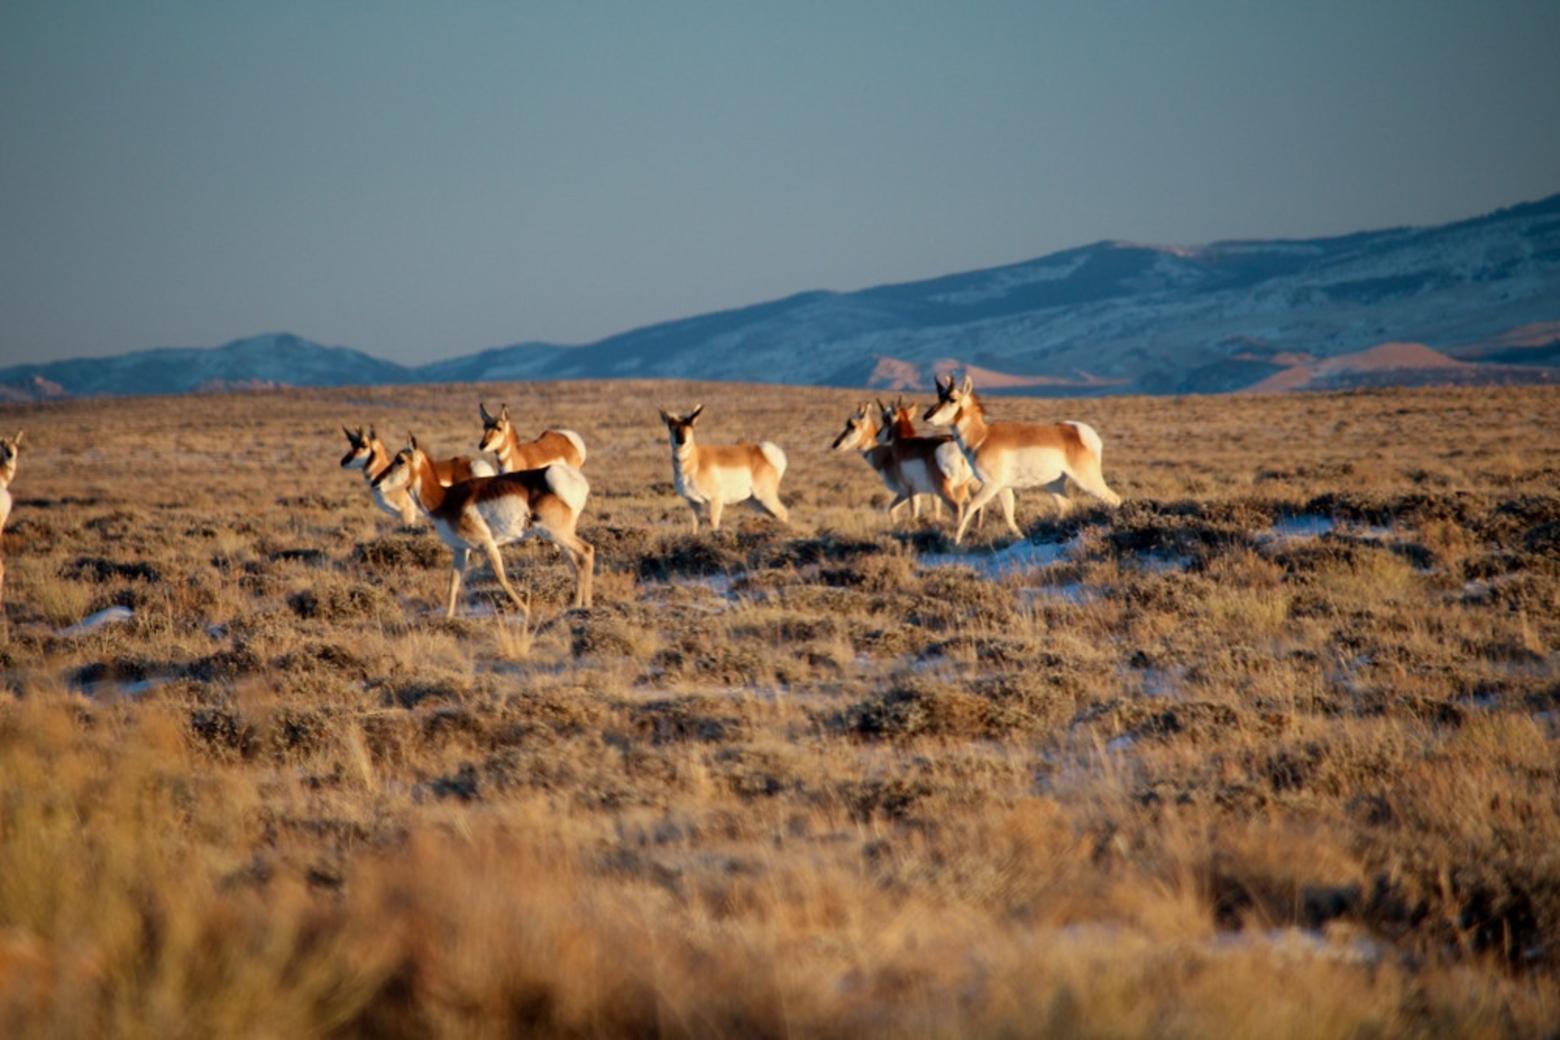 Pronghorn on winter range and along a migration corridor in Wyoming which has been a national leader in safe wildlife passage issues. With regard to protecting wildlife habitat against fossil fuel development, the state has struggled.  Photo courtesy Gregory Nickerson/Wyoming Migration Initiative